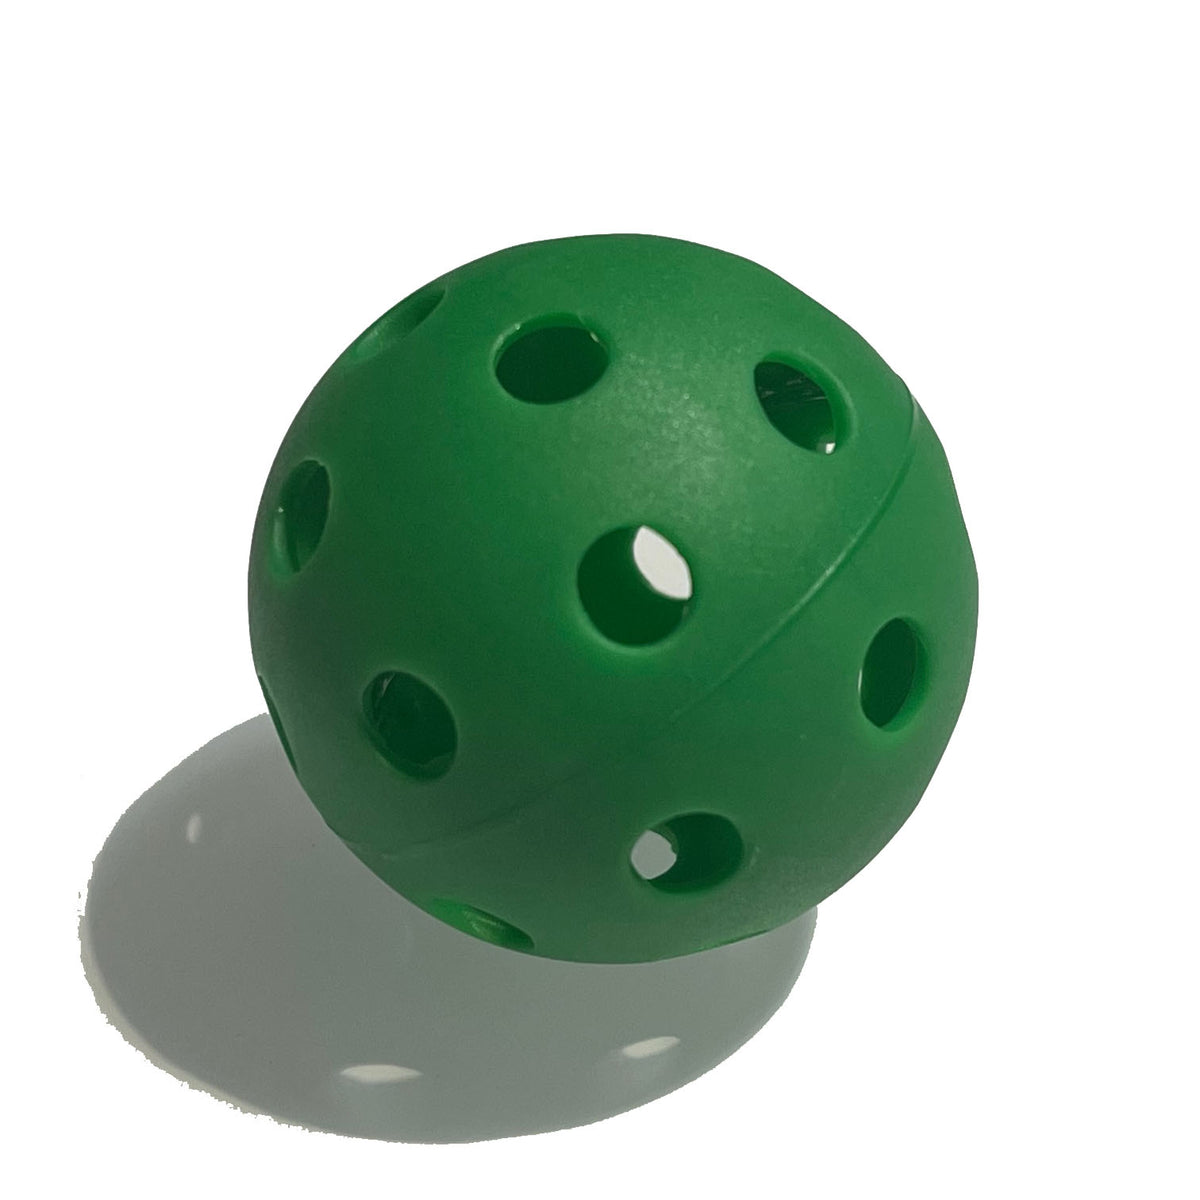 28-33% off - 24 Golf Size Training Balls - SPECIAL DEAL